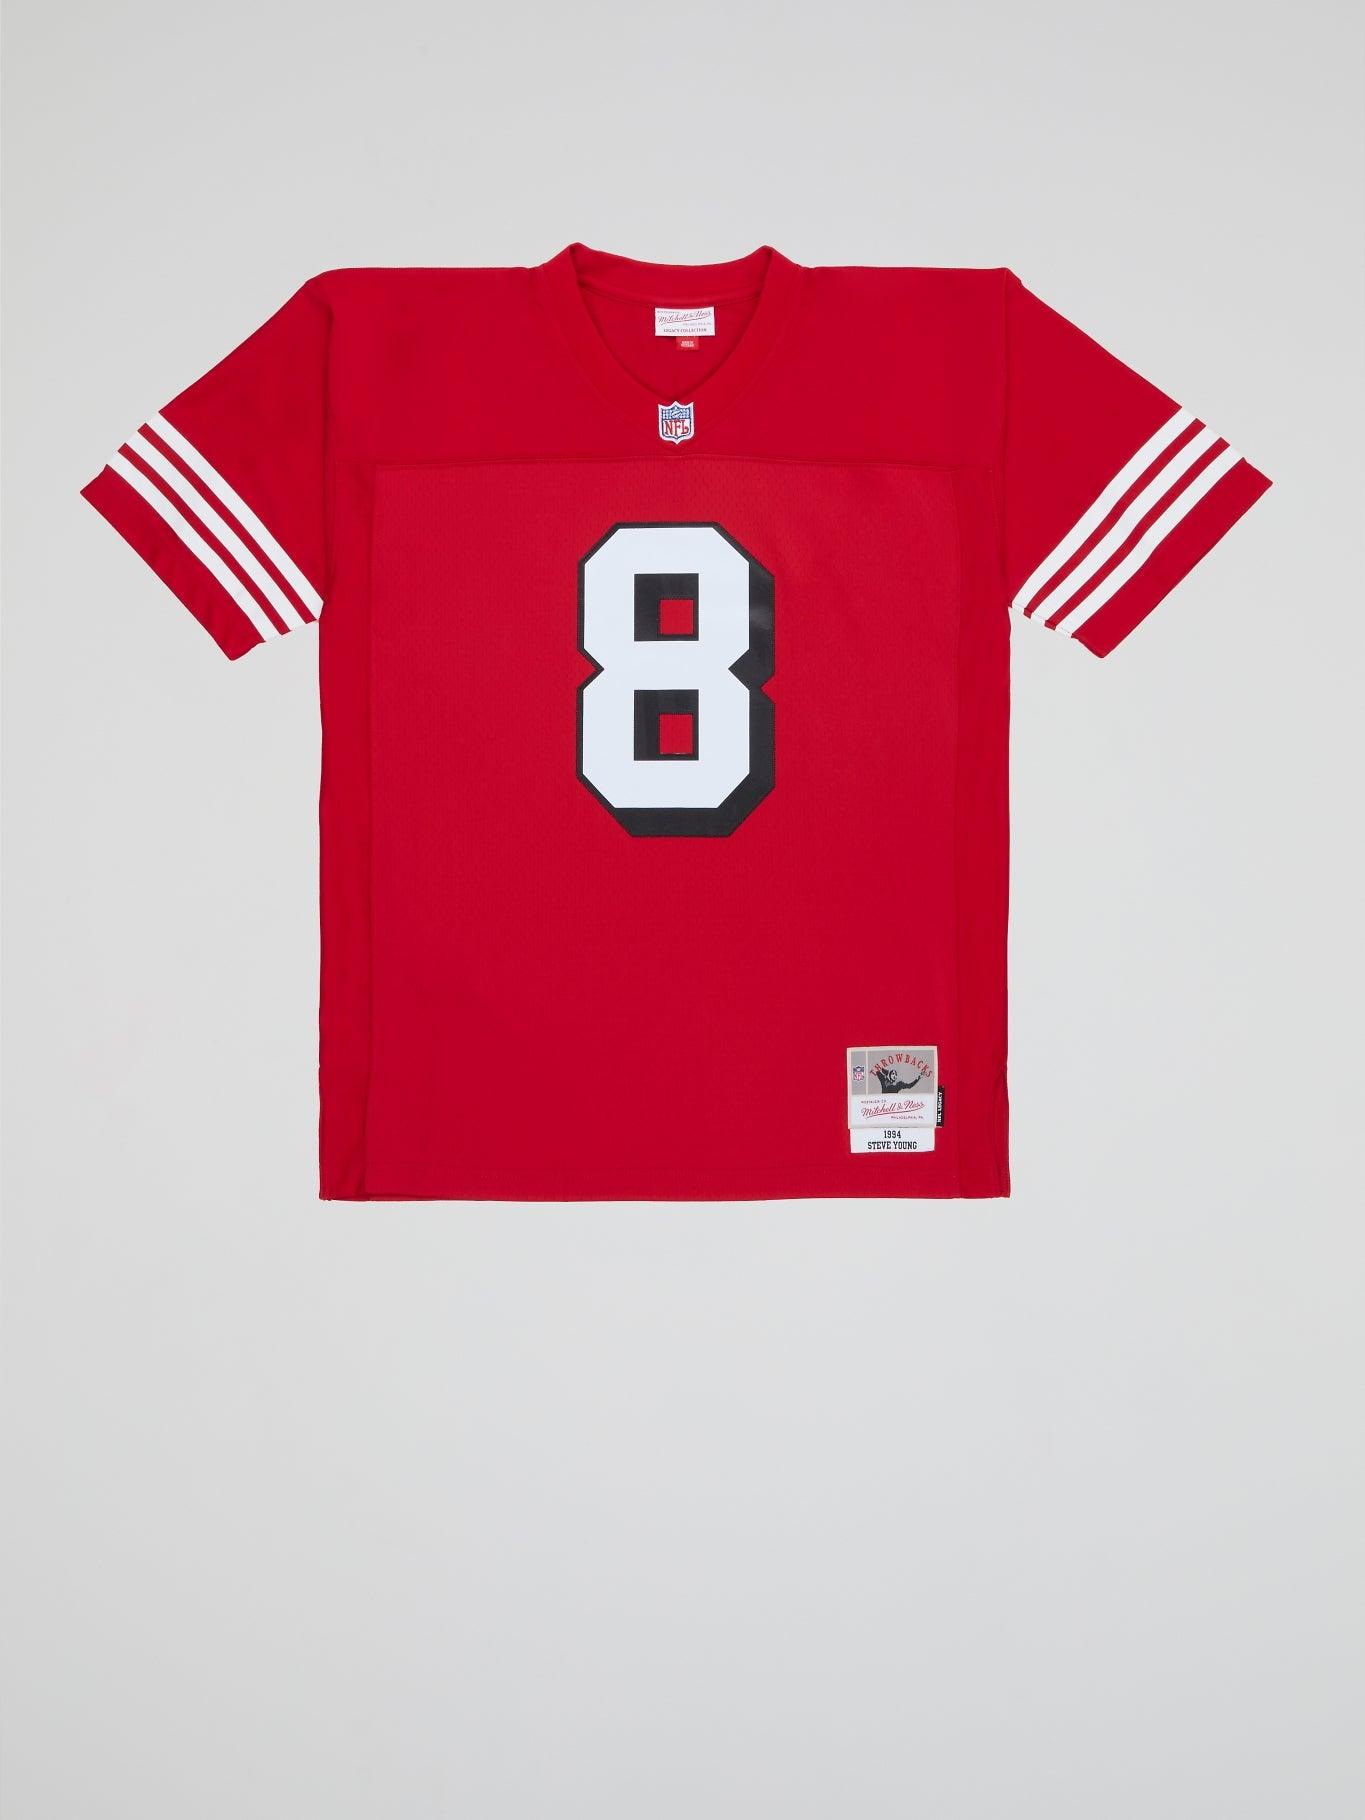 steve young mitchell ness jersey